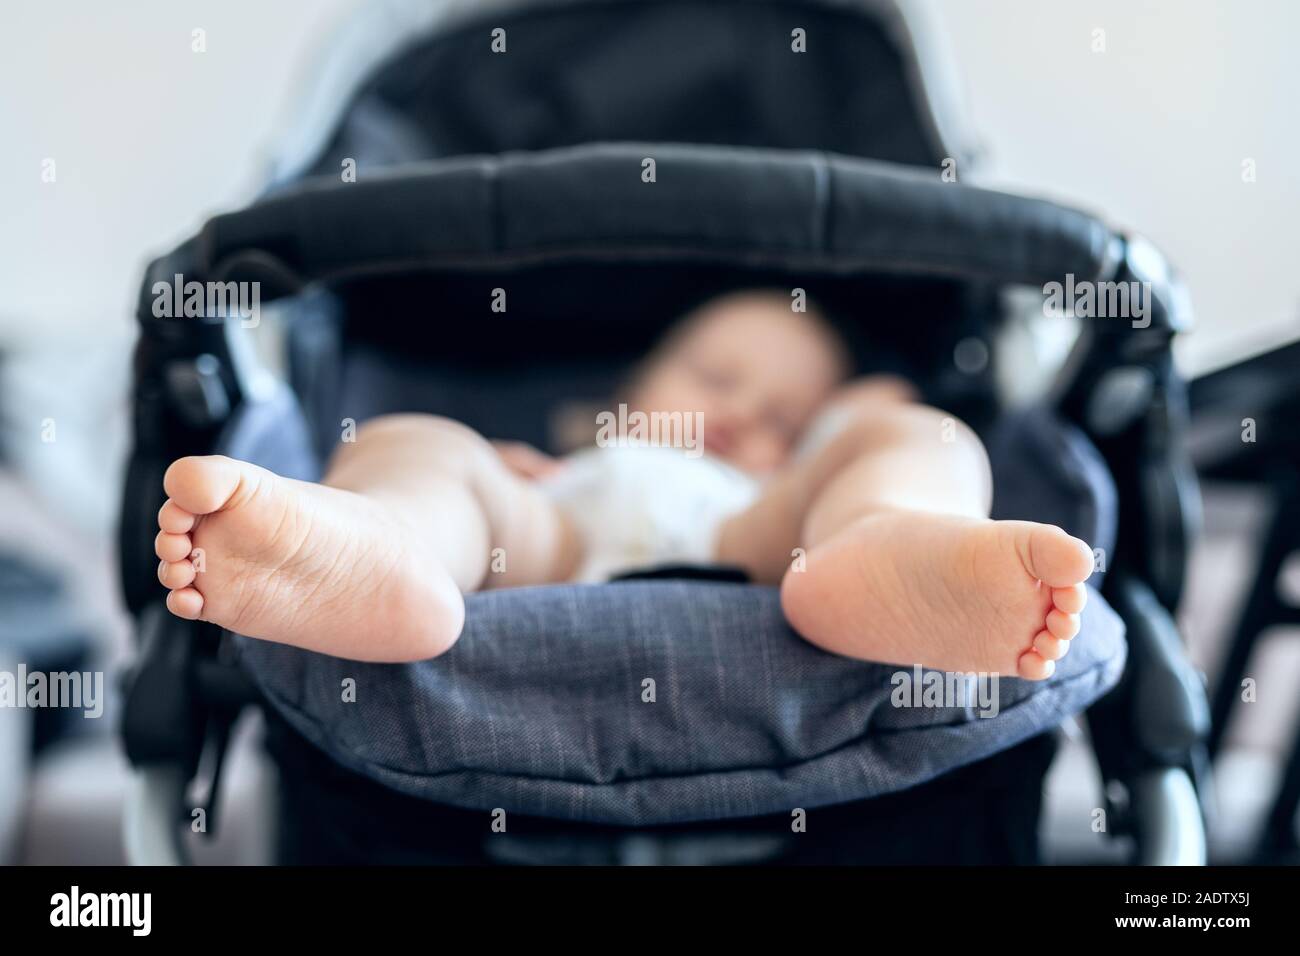 Cute adorable caucasian blond toddler bou sleeping in stroller at daytime. Children healthcare and happy childhood concept Stock Photo